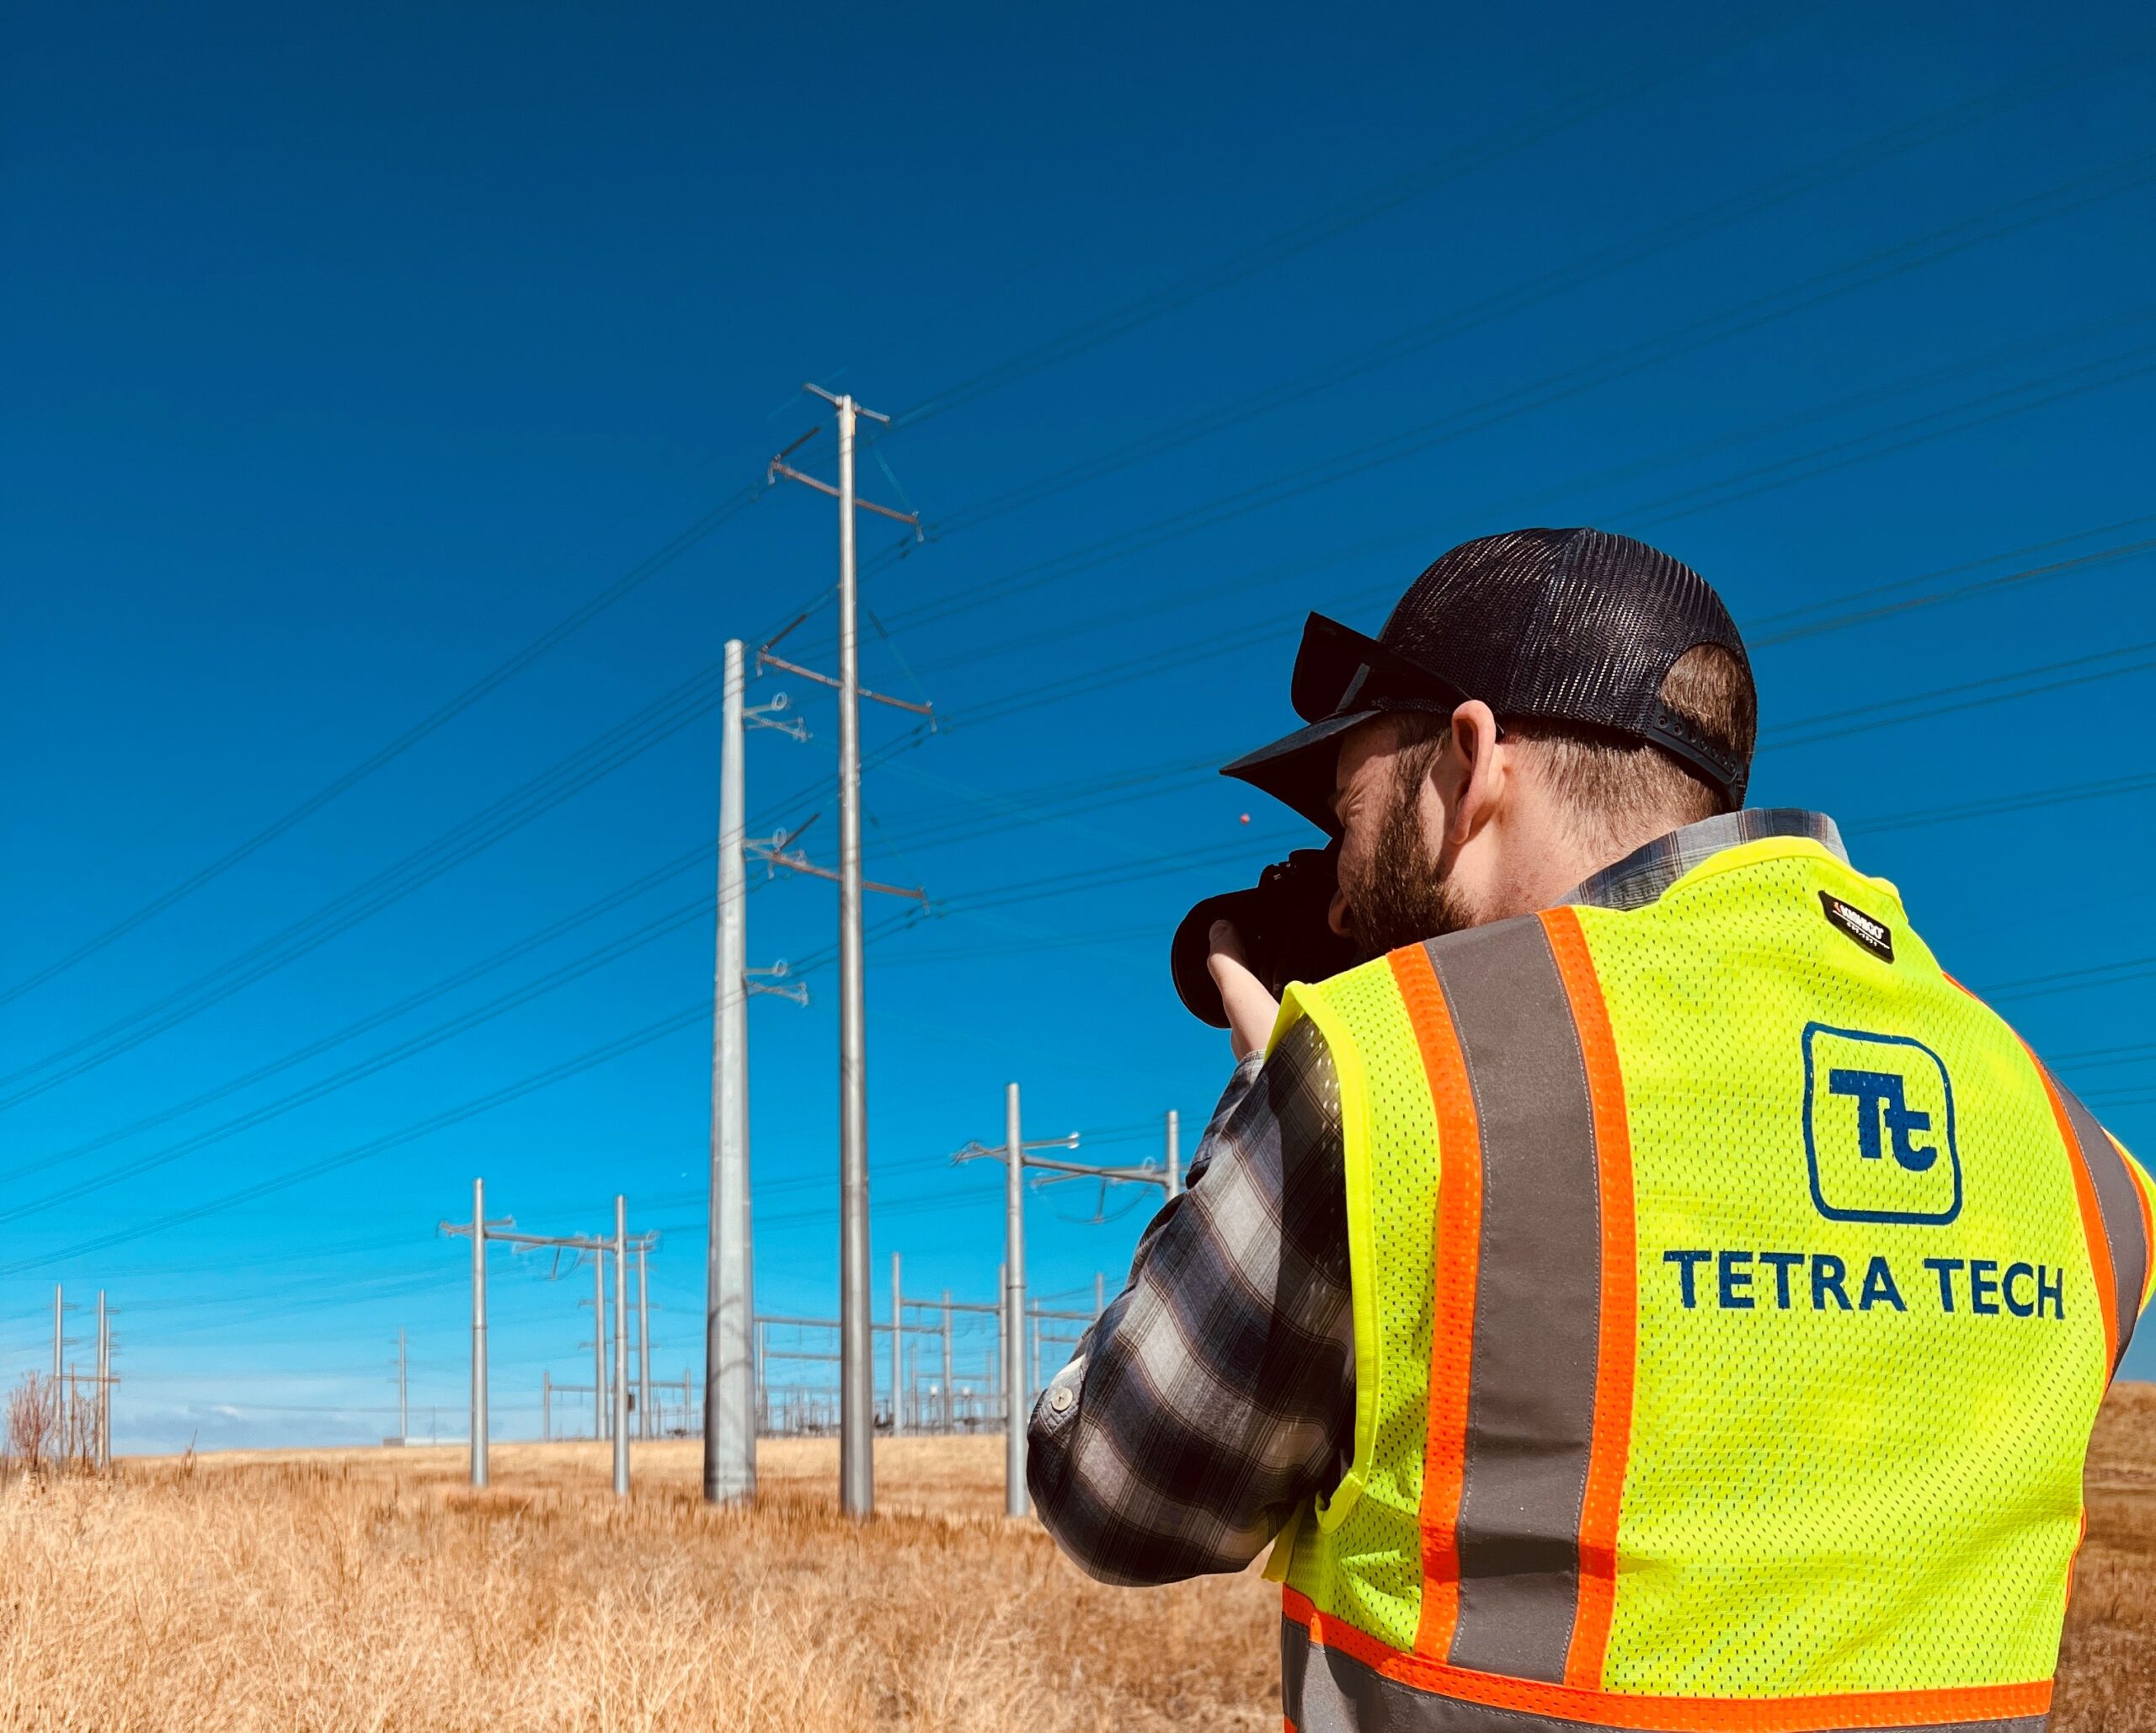 A man is taking a technical photograph of electricity infrastructure. He is wearing a yellow hi-vis vest branded with the logo of Tetra Tech.